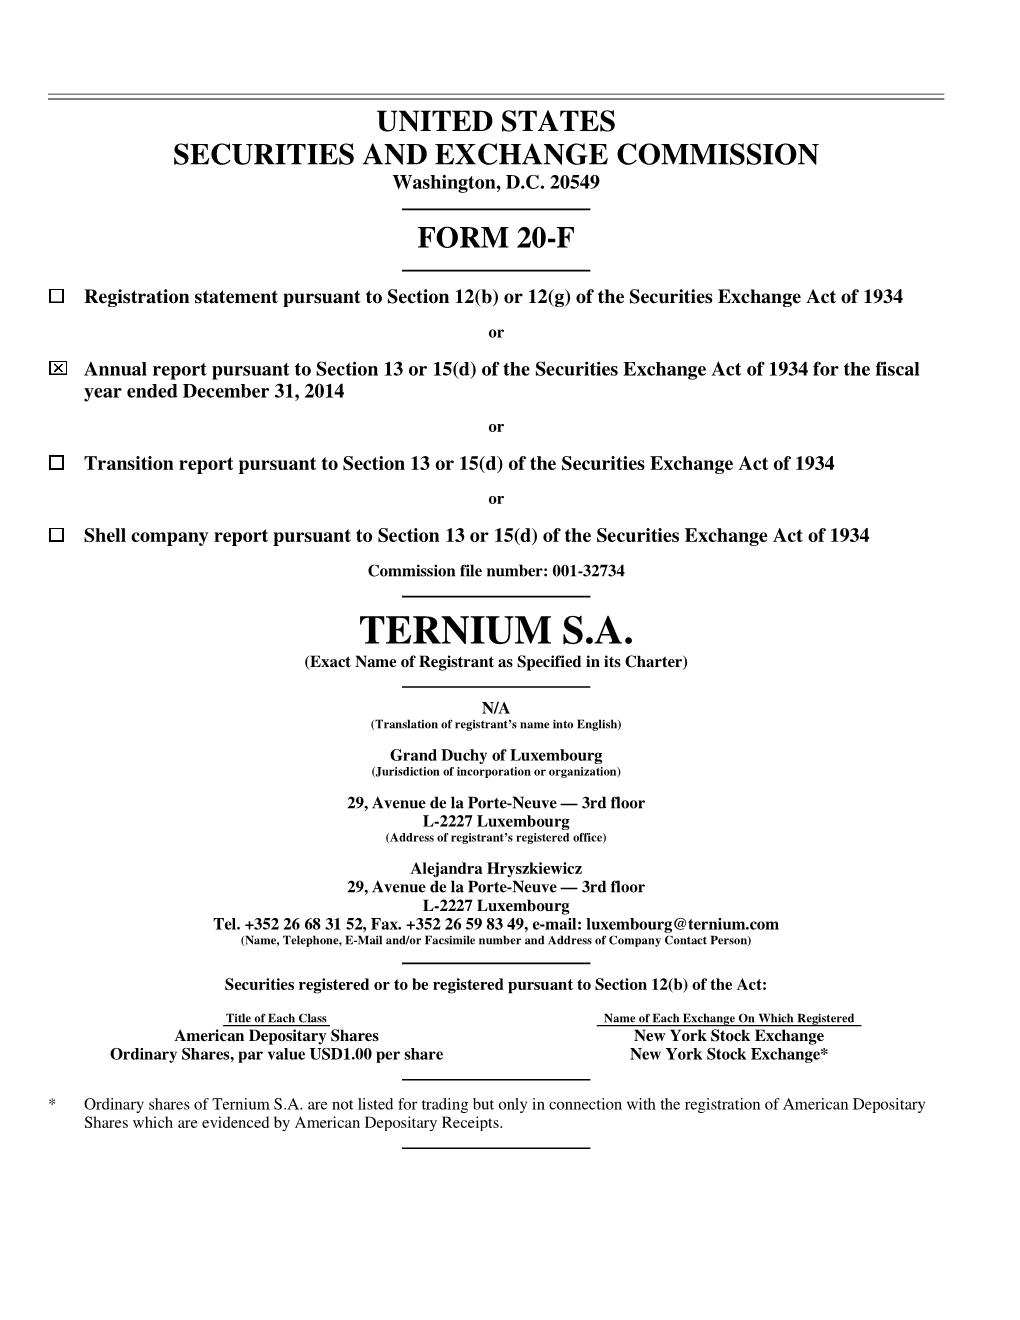 TERNIUM S.A. (Exact Name of Registrant As Specified in Its Charter)